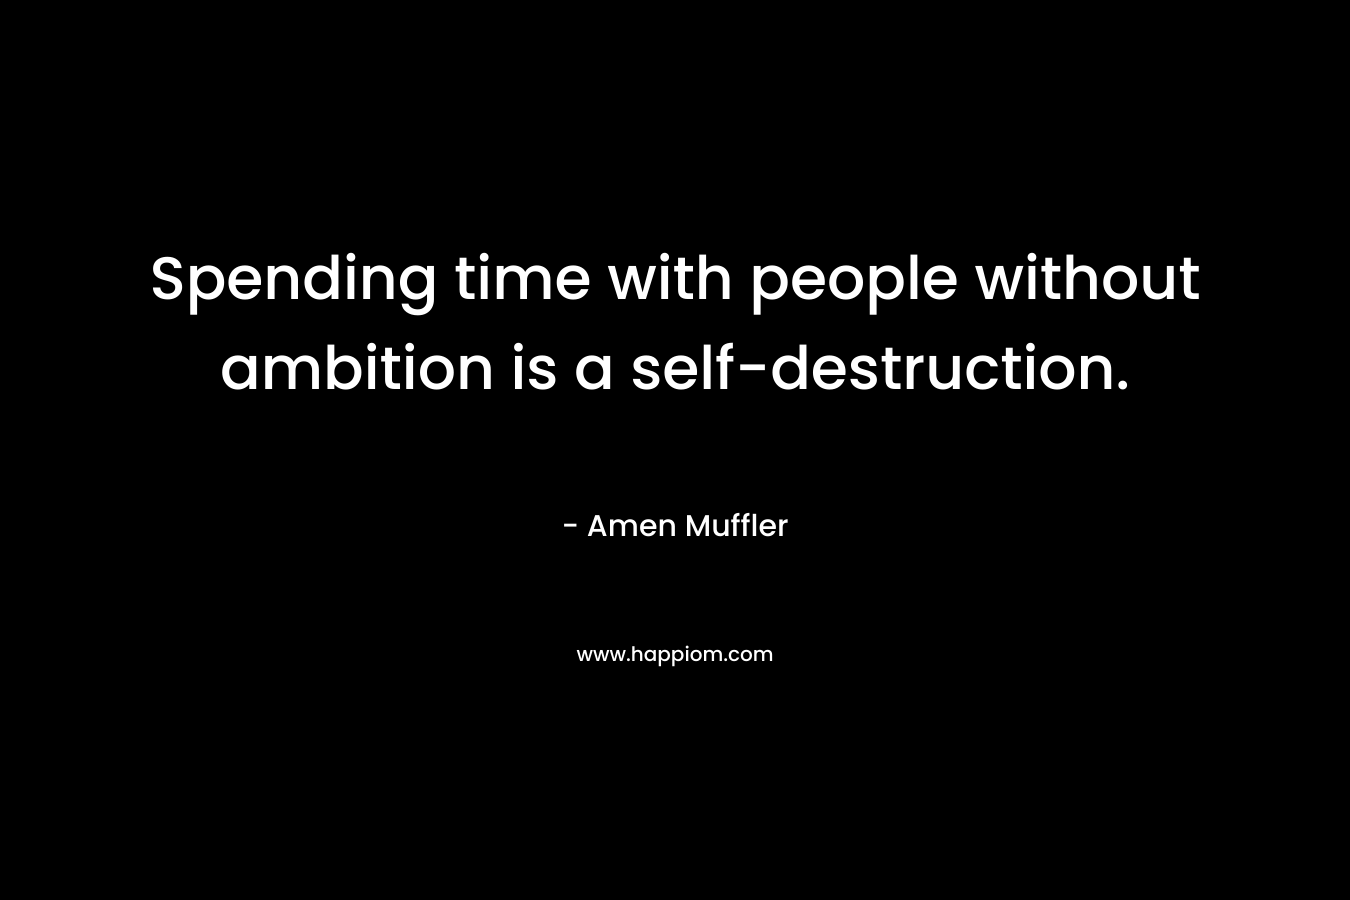 Spending time with people without ambition is a self-destruction. – Amen Muffler